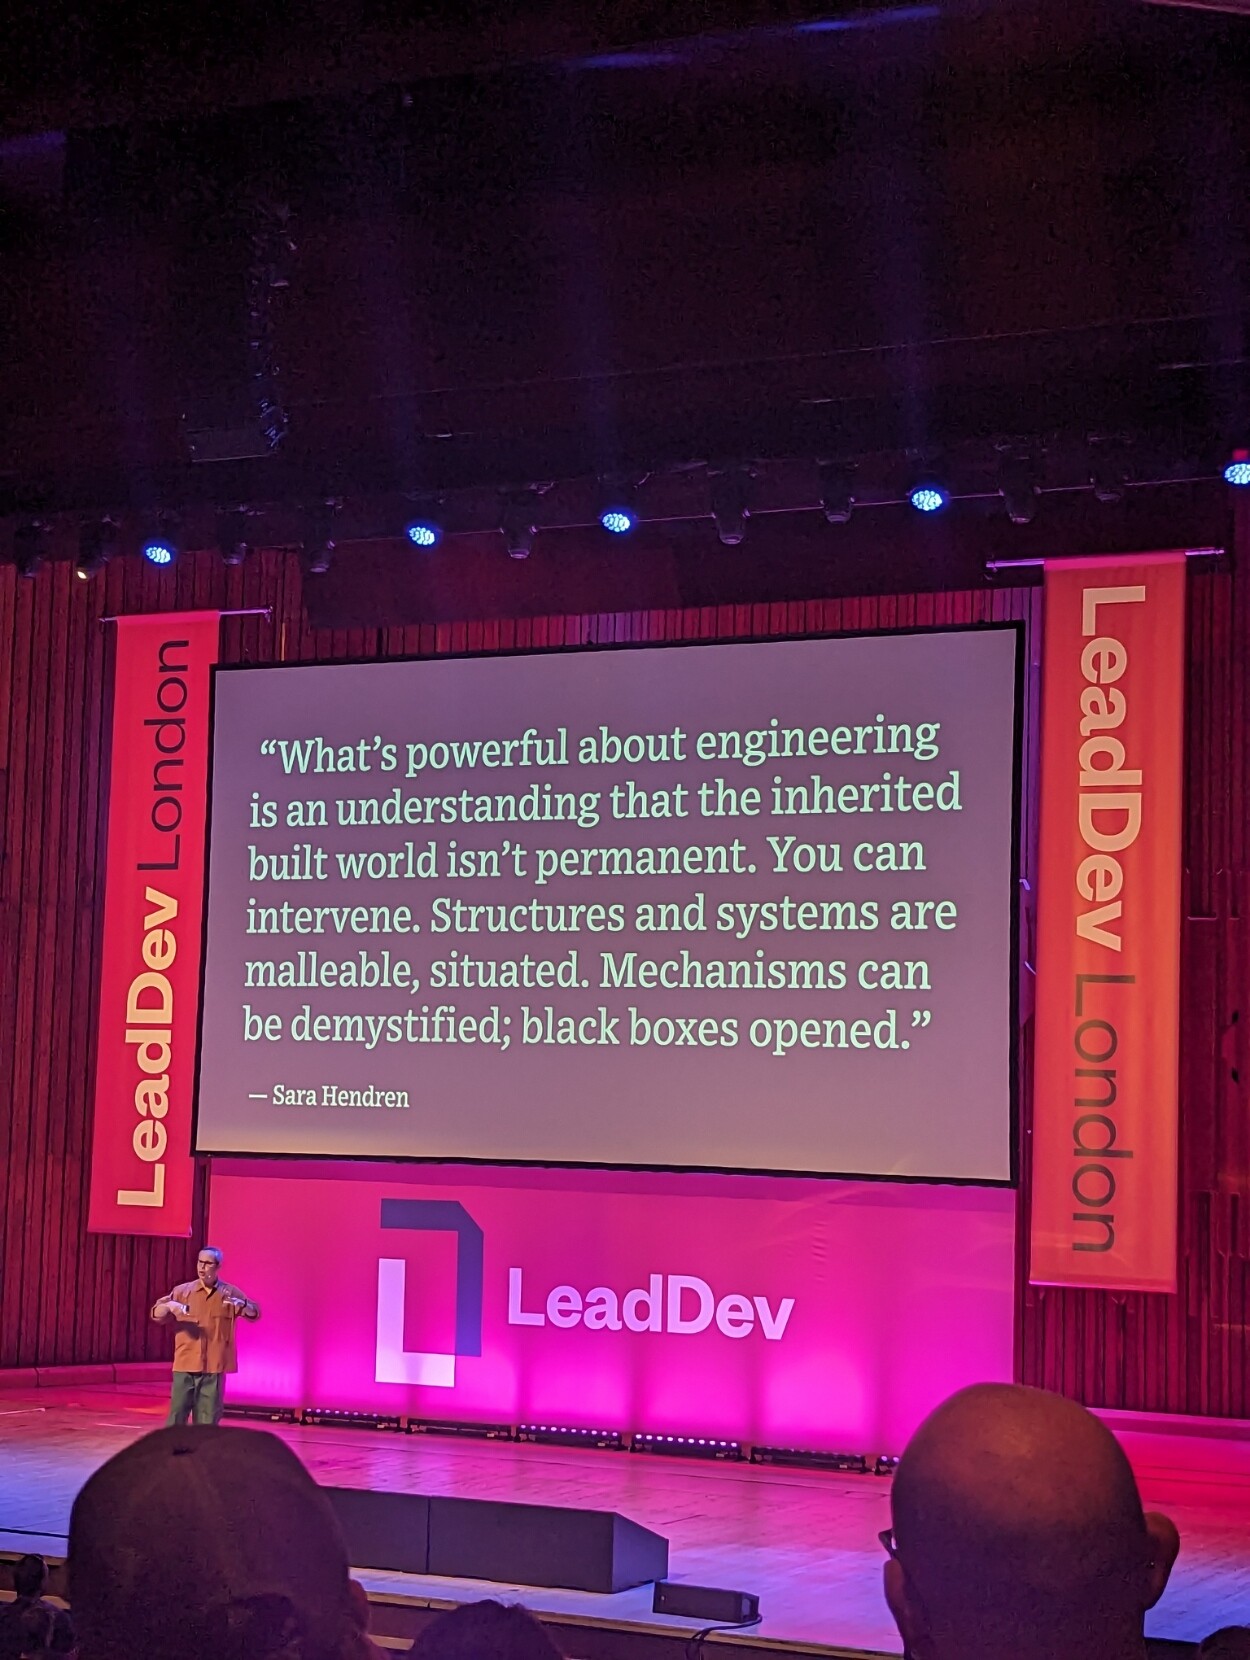 David Yee on the stage at LeadDev London, in front of a slide quoting Sara Hendren "What's powerful about engineering is an understanding that the inherited built world isn't permanent. You can intervene. Structures and systems are malleable, situated. Mechanisms can be demystified; black boxes opened."